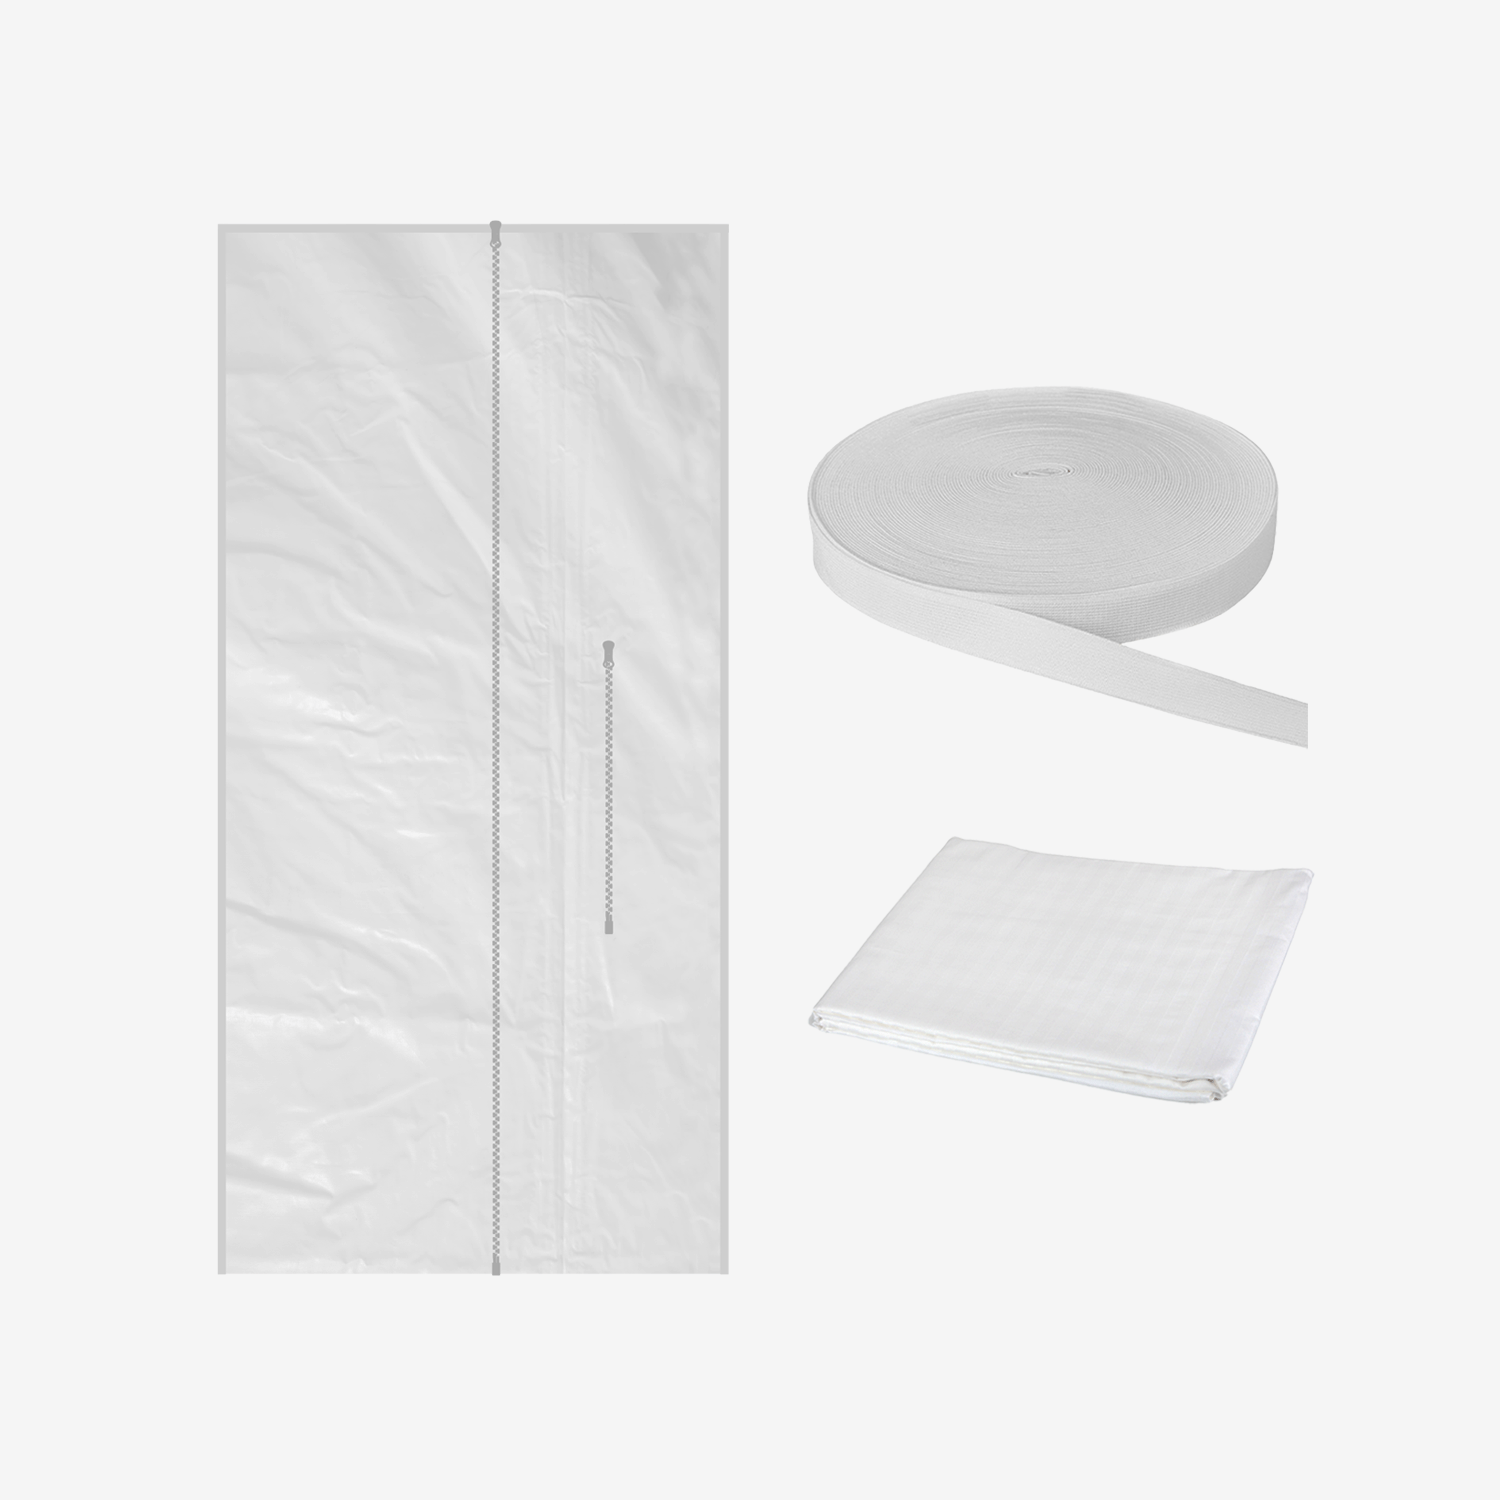 Universal Sliding Door Seal Kit for Portable Air Conditioner